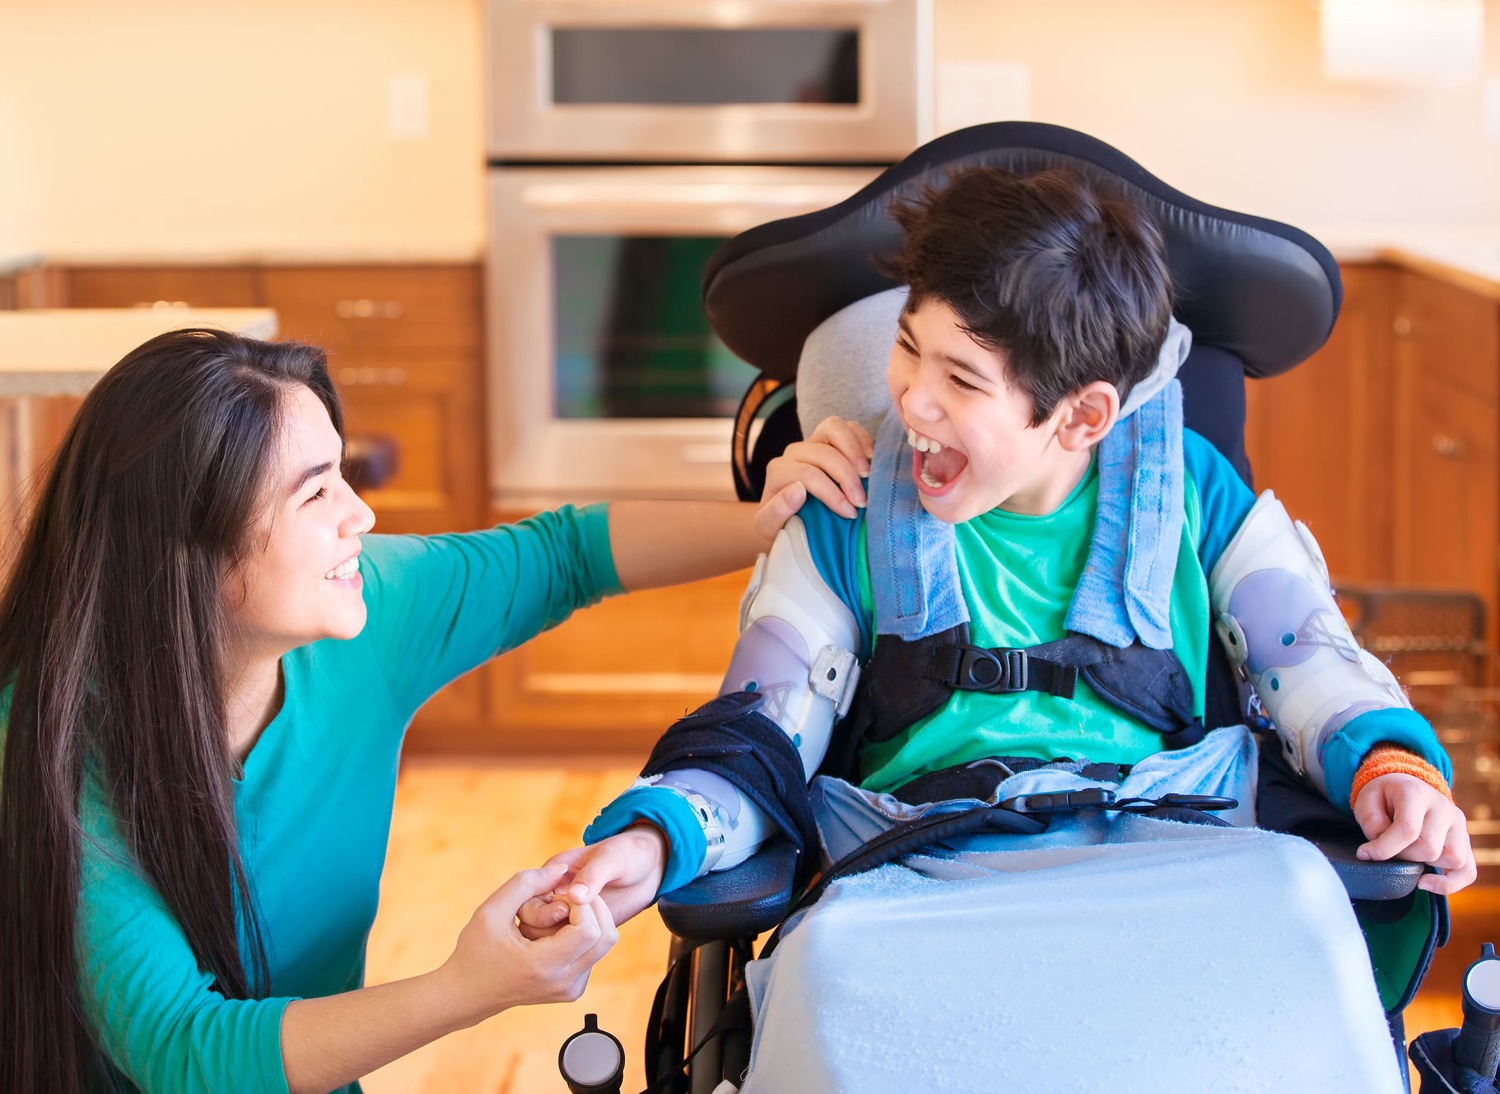 Mom and son with cerebral palsy holding hands and smiling in the kitchen